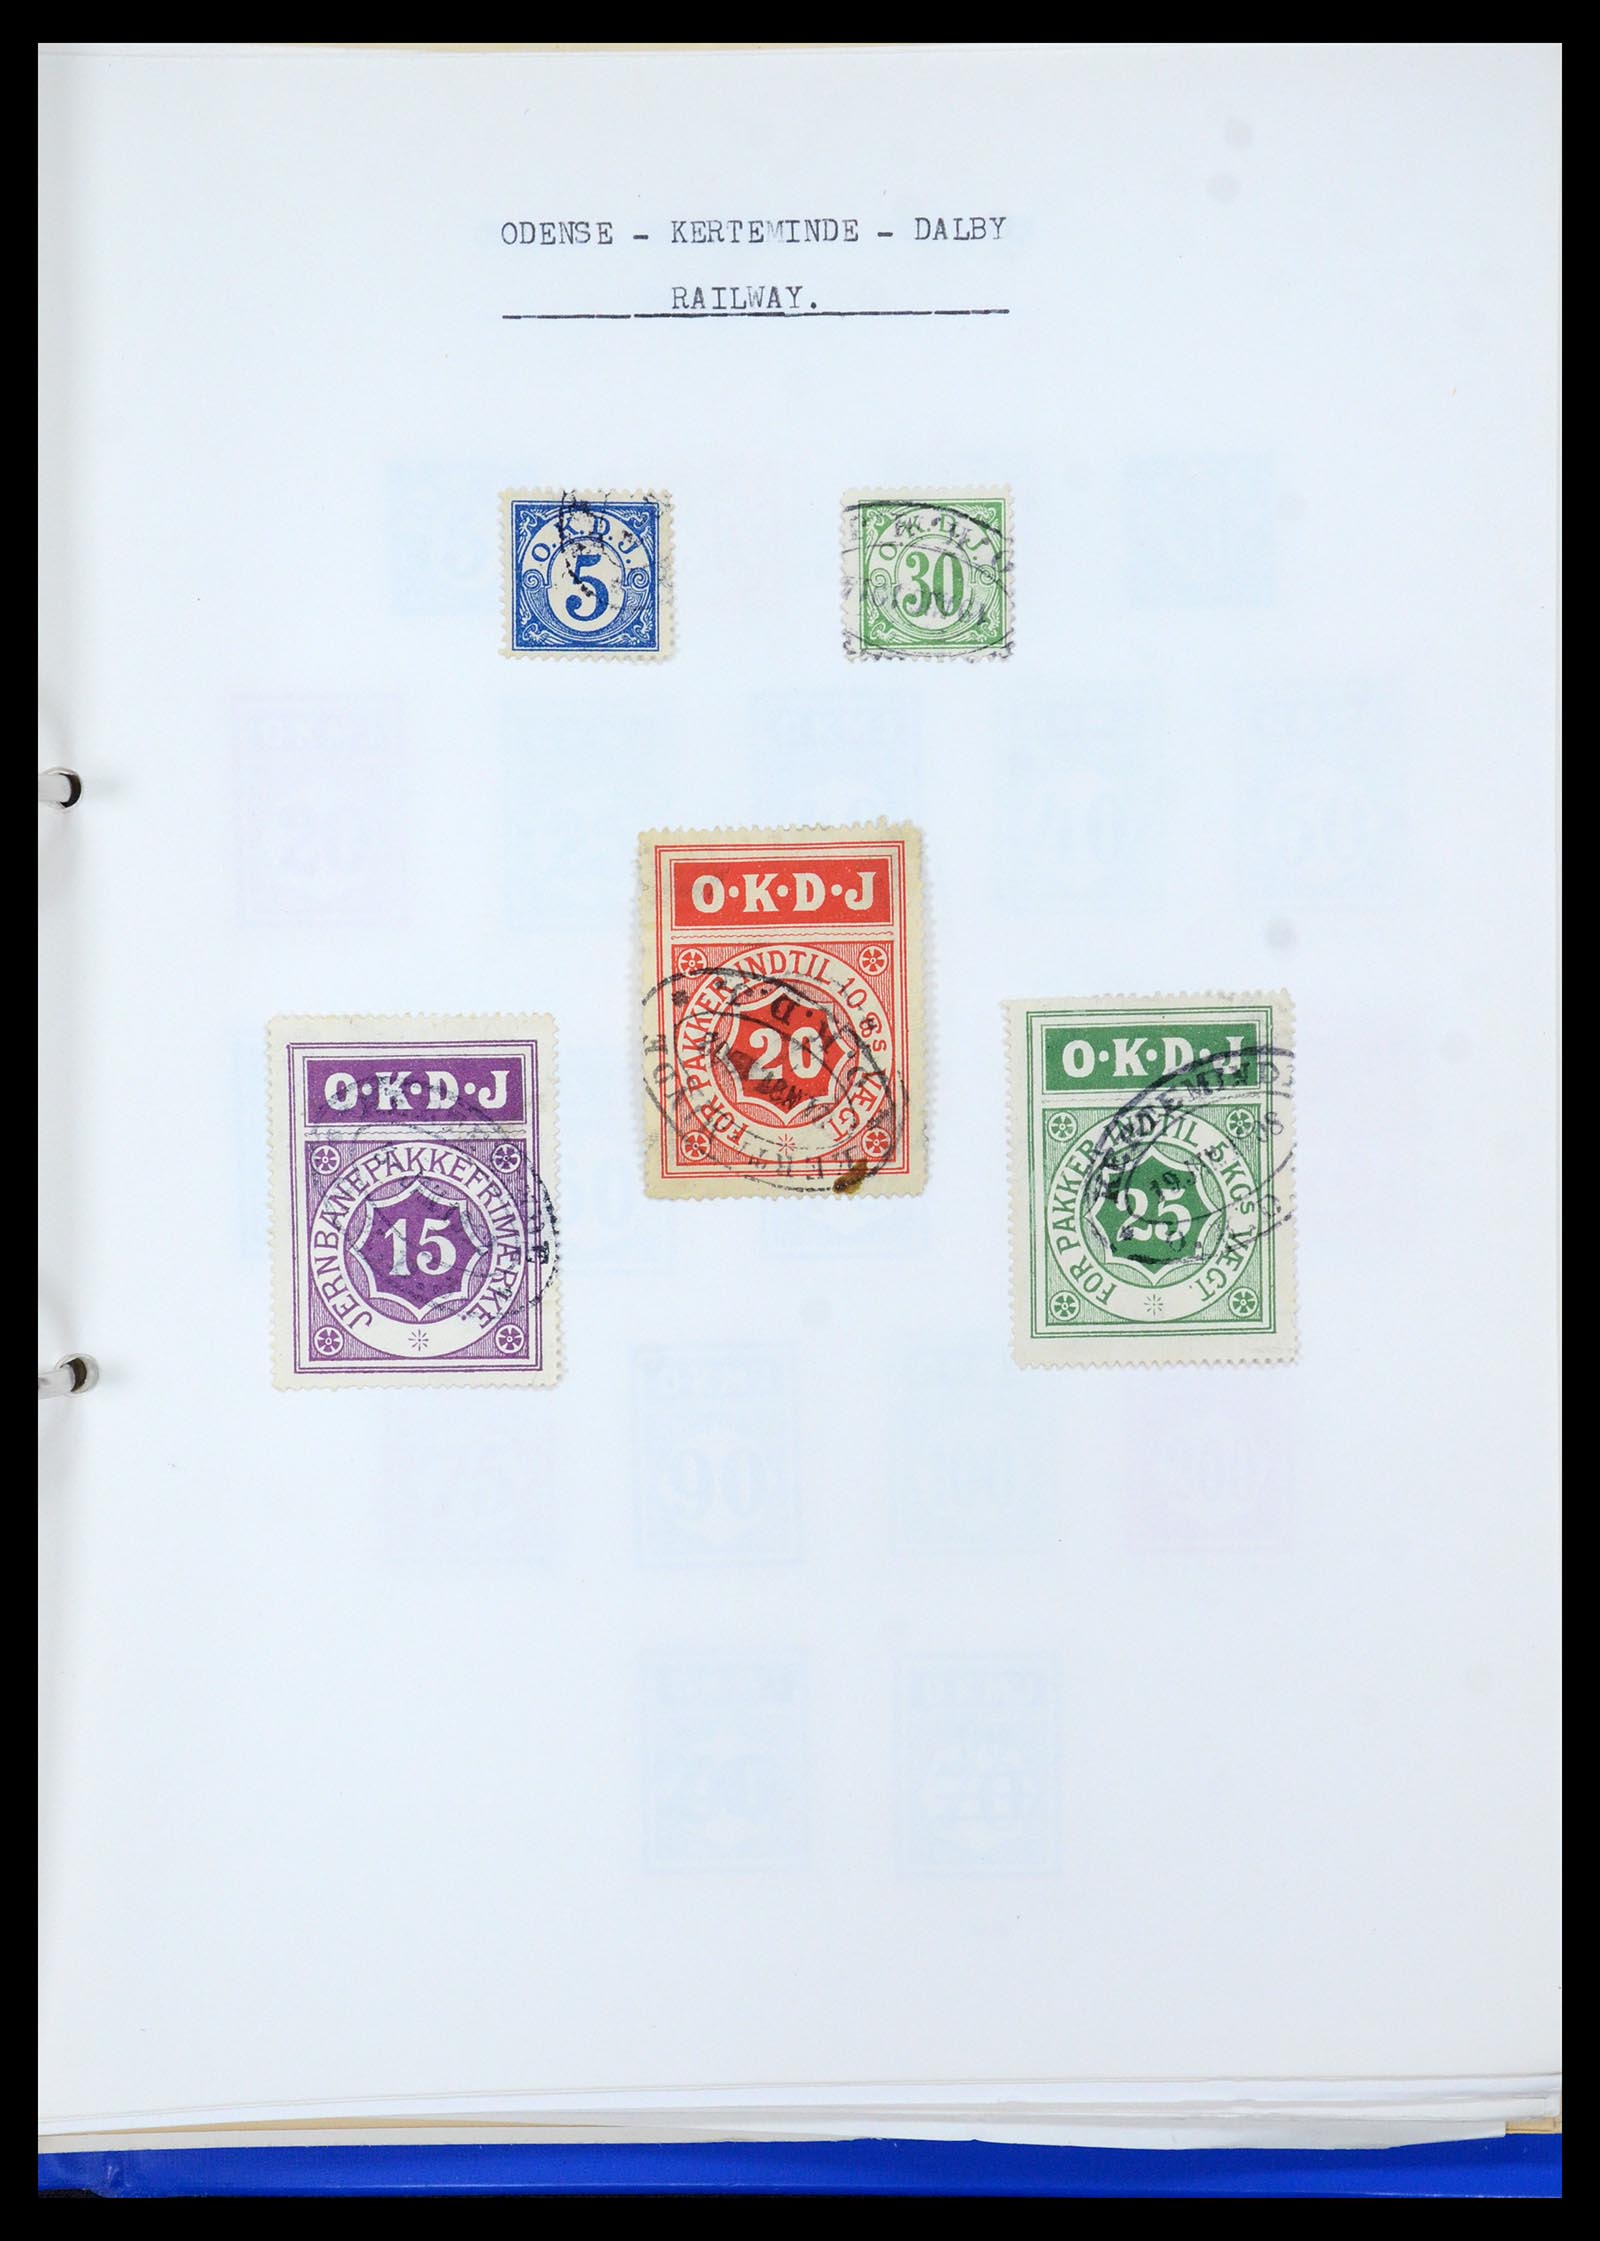 35650 074 - Stamp Collection 35650 Denmark railroad stamps.